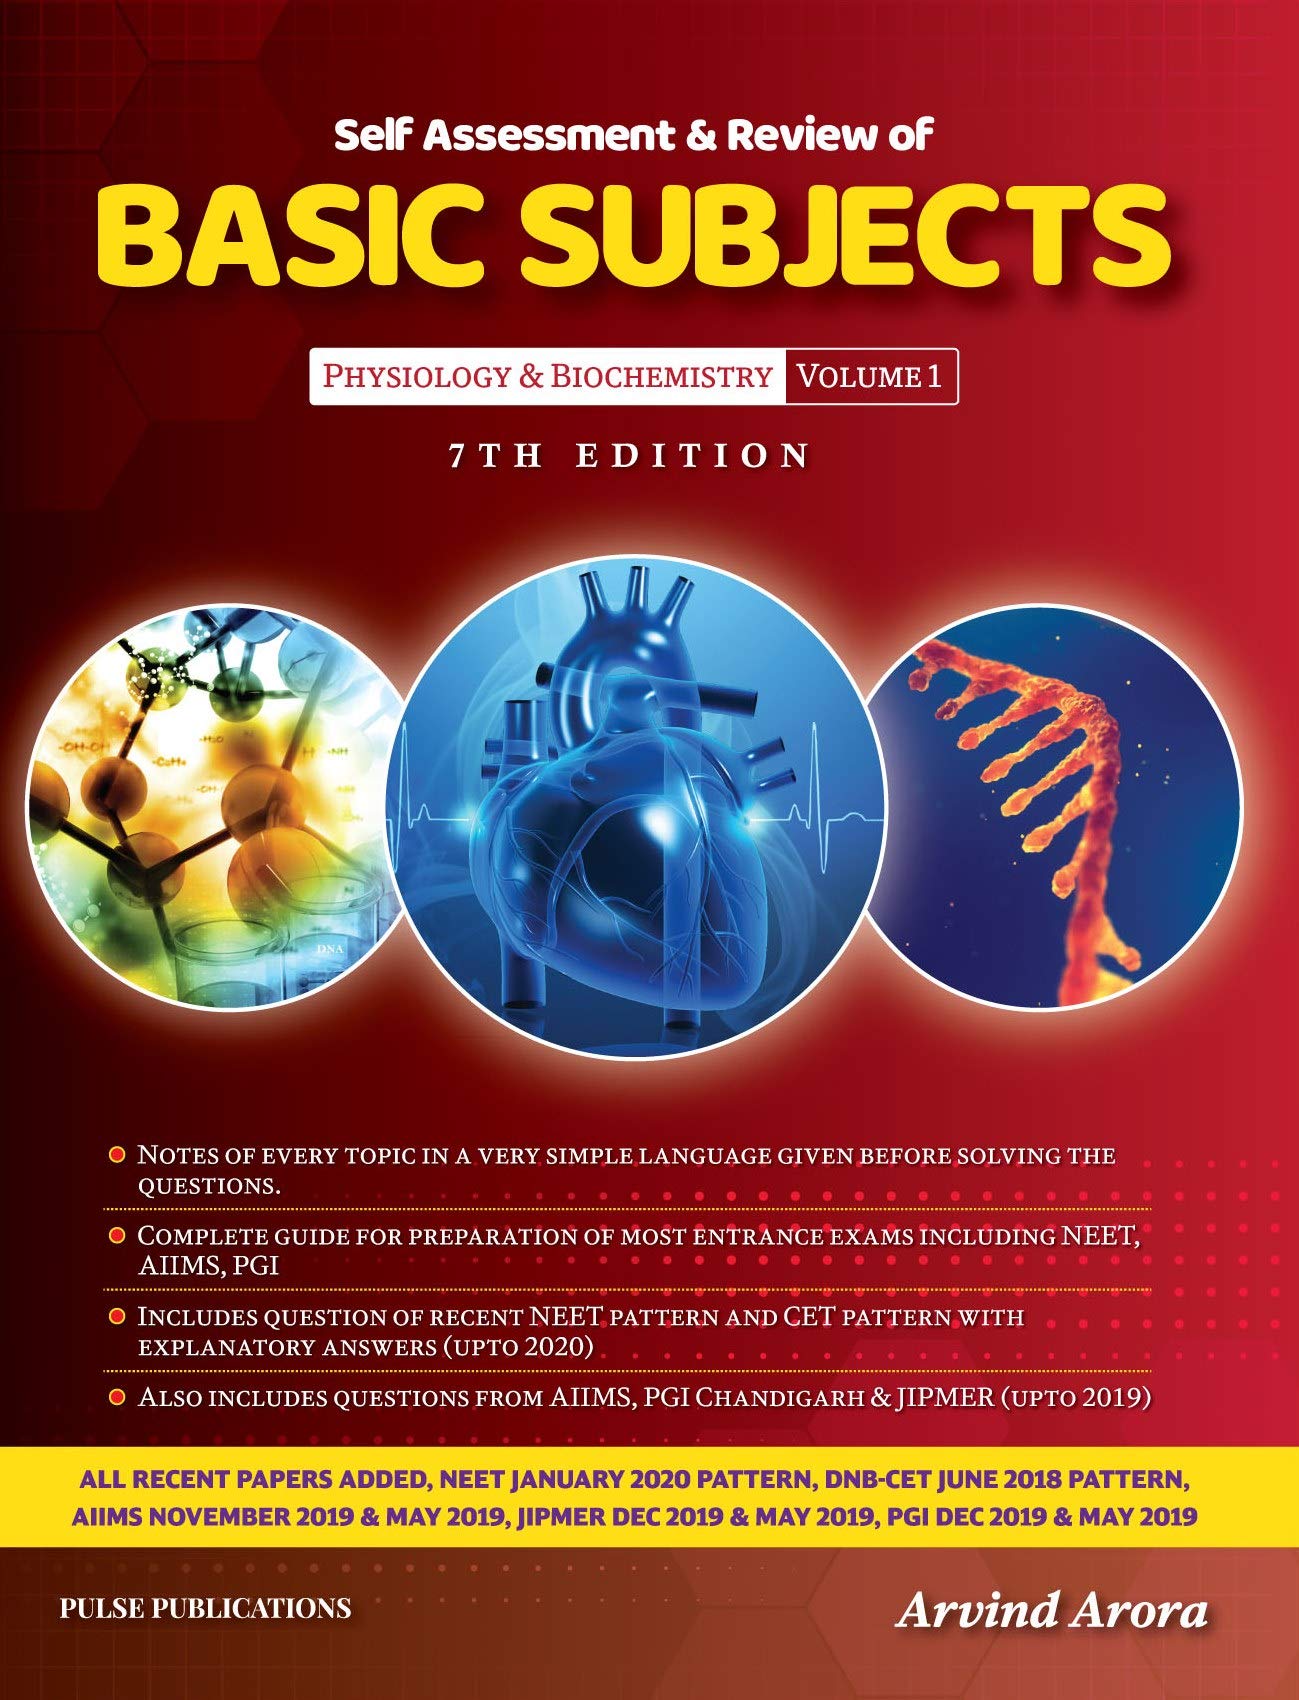 self-assesment-review-of-basic-subjects-physiology-biochemistry-vol1